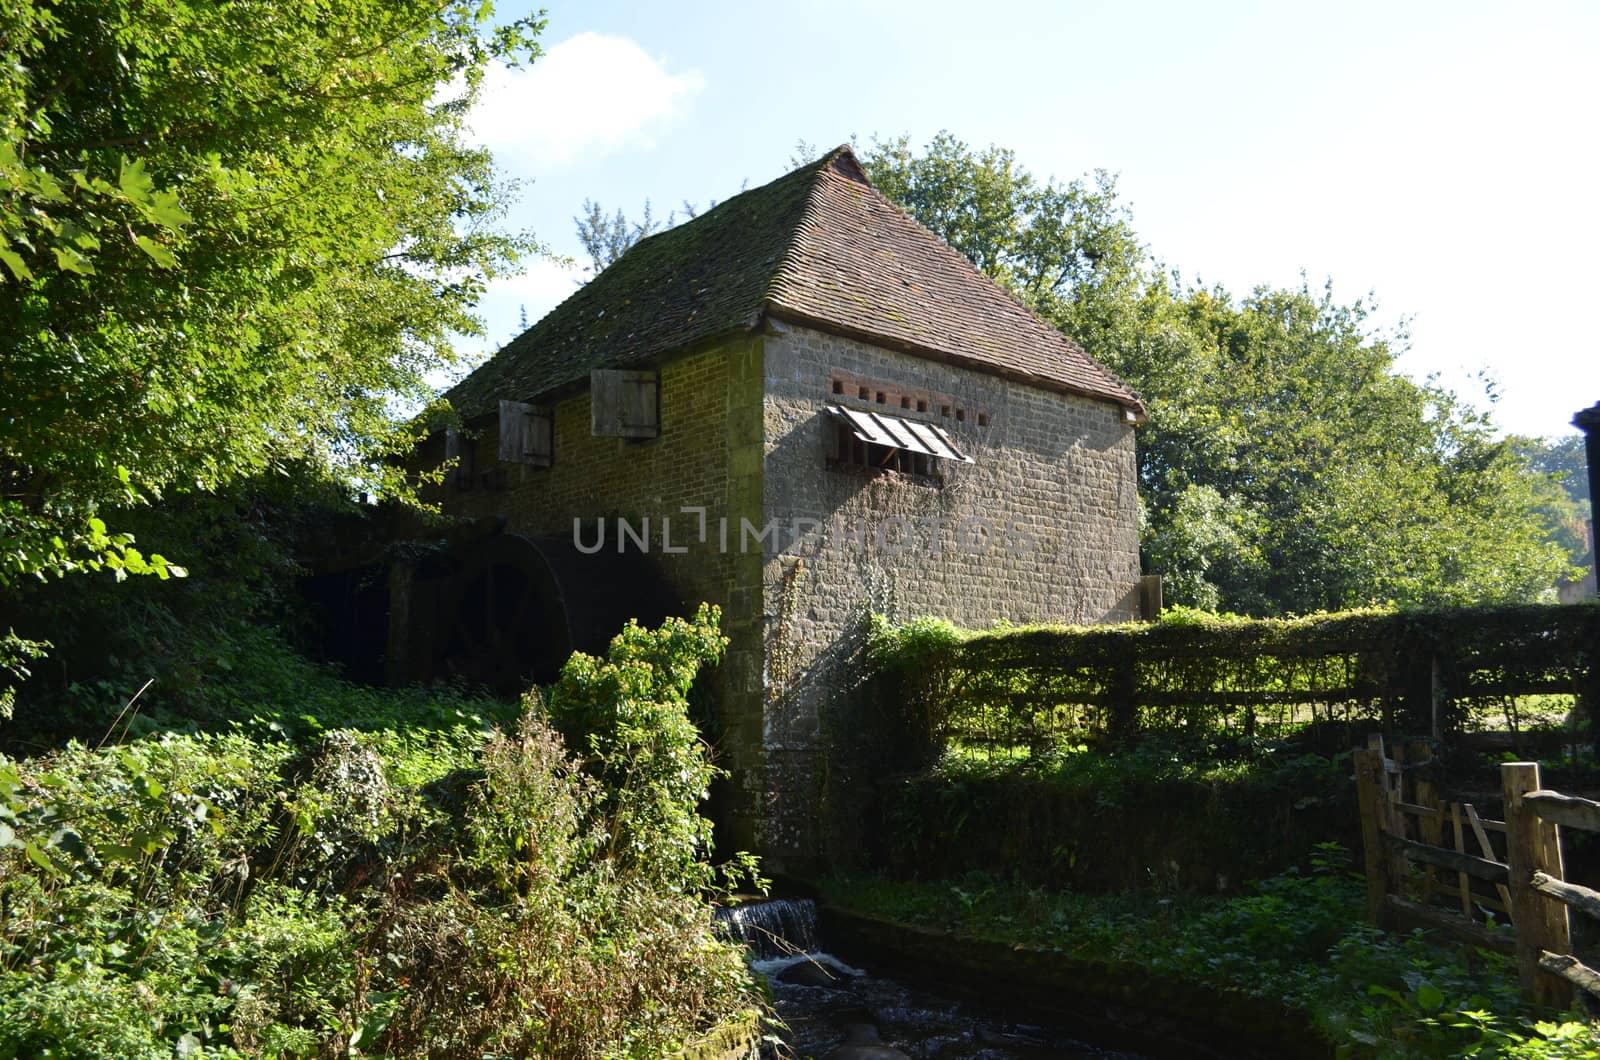 Sussex watermill. by bunsview